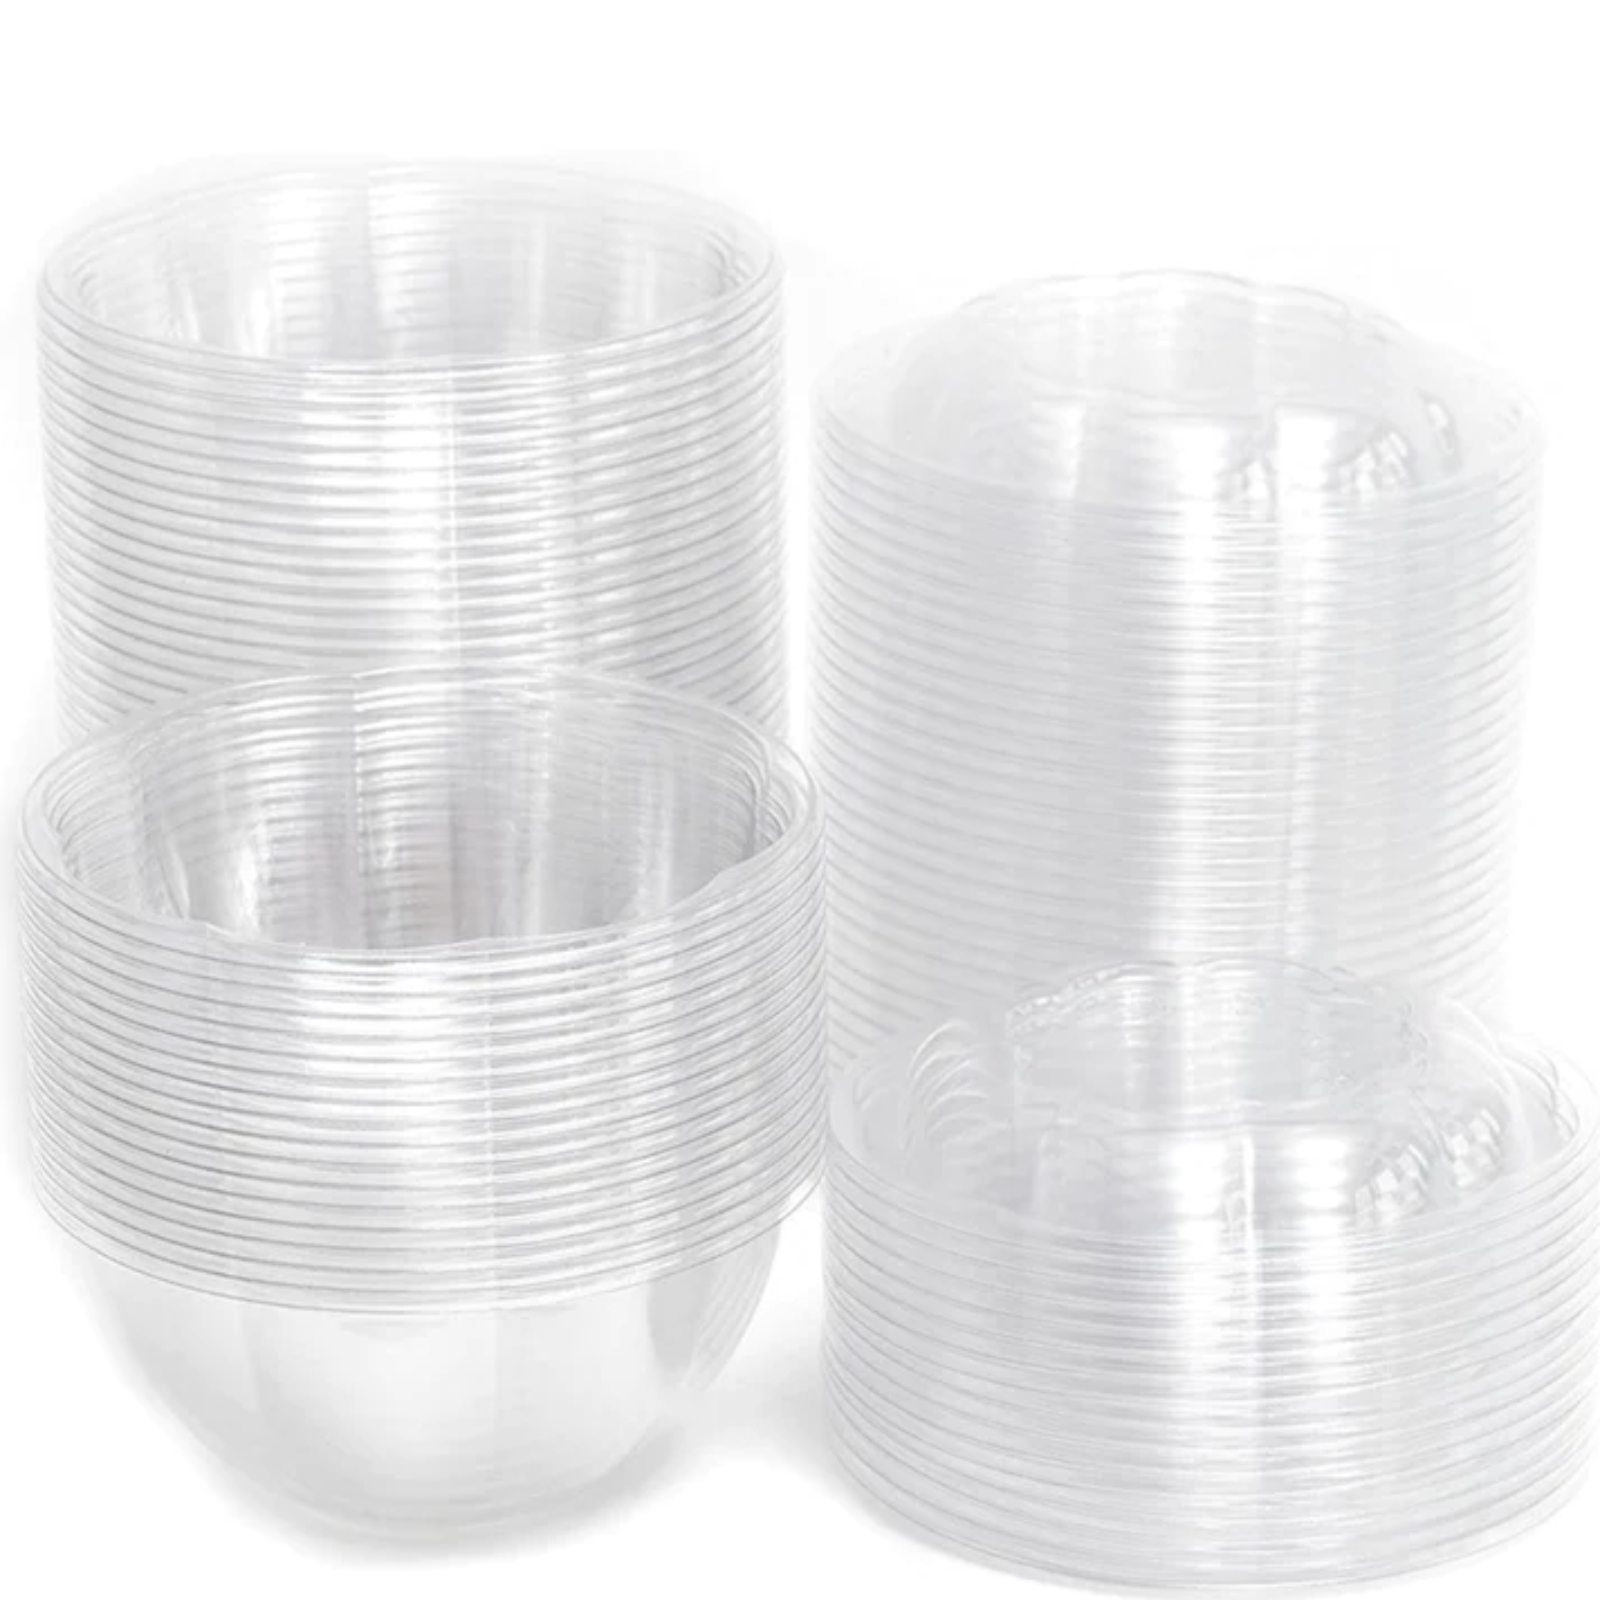 *WHOLESALE* 24oz. Rose / Salad Bowls To-Go Containers with lids | 150 ct/case Smoothie Cups VeZee   